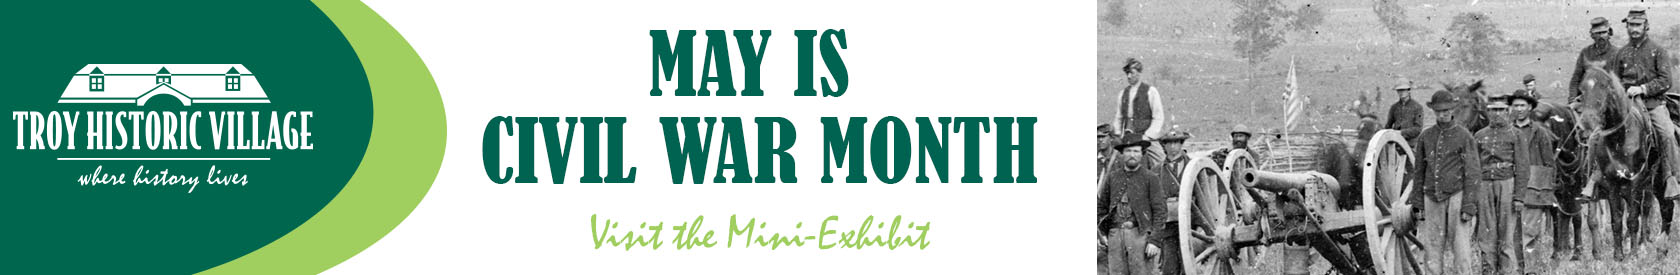 The Month of May is Civil War Month!